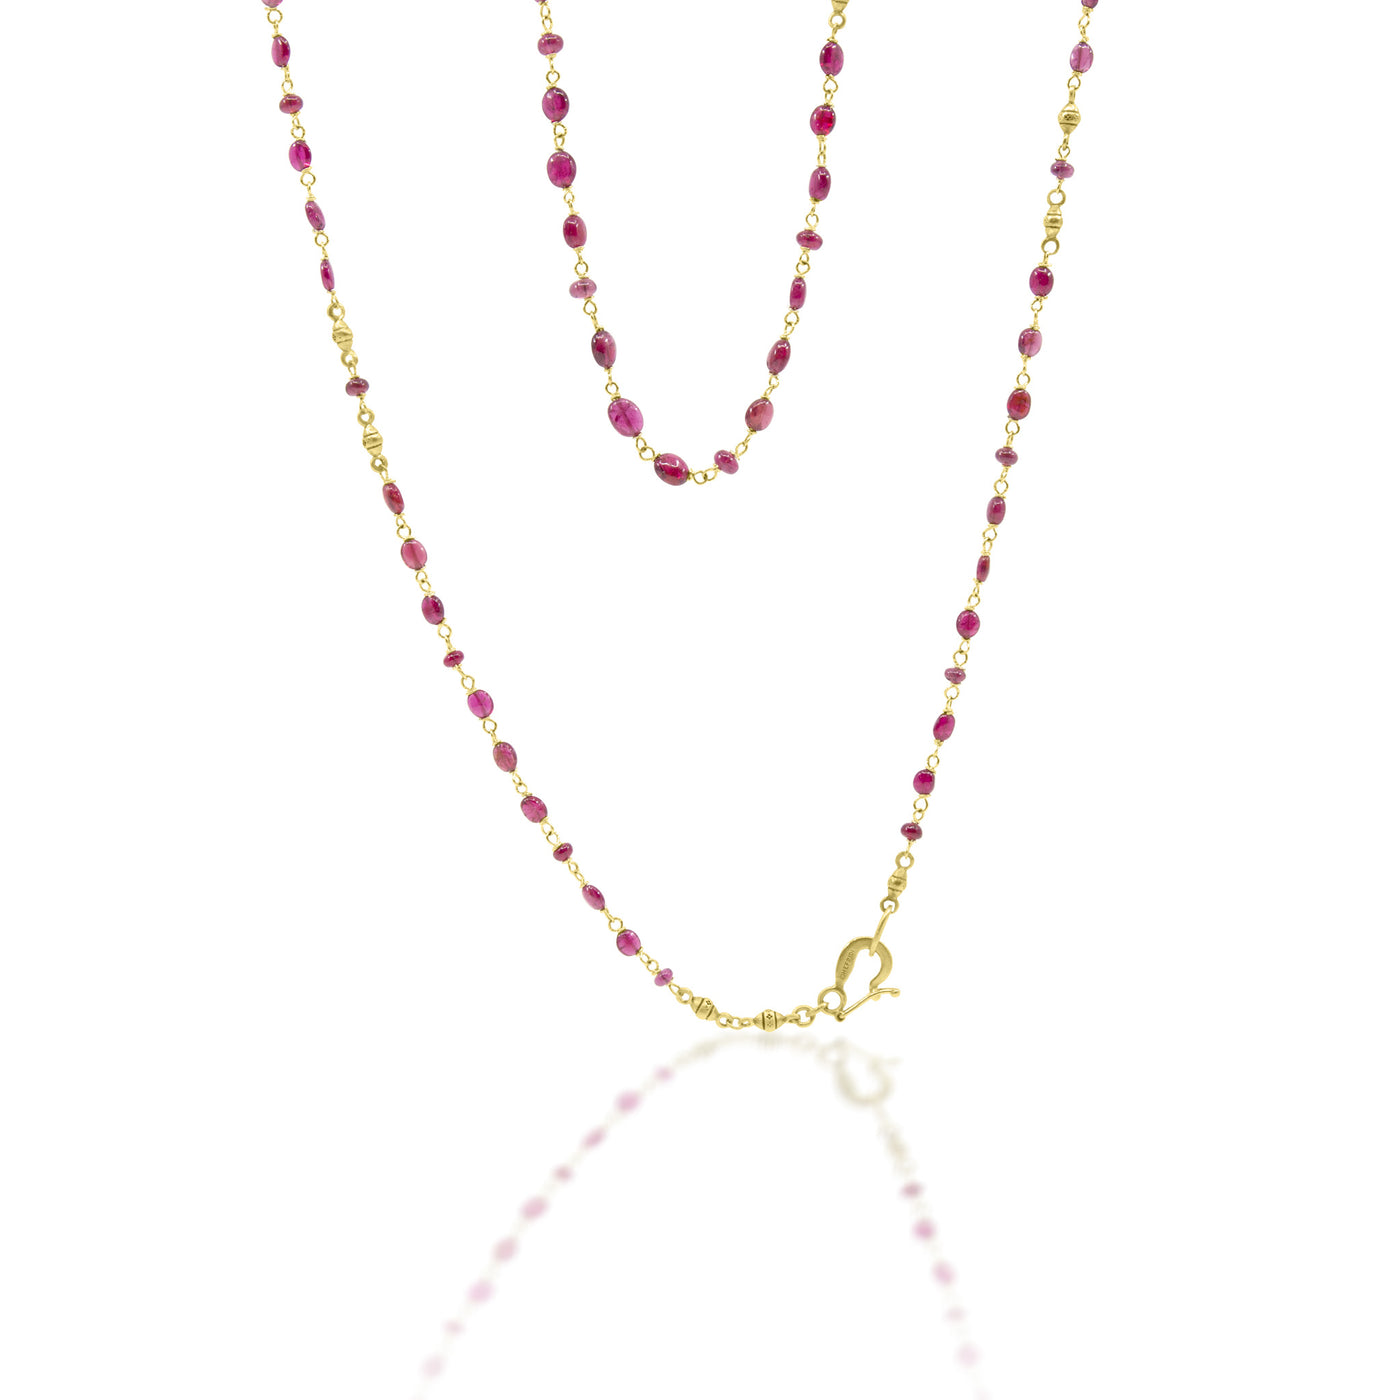 25" Smooth Spinel Beaded Necklace